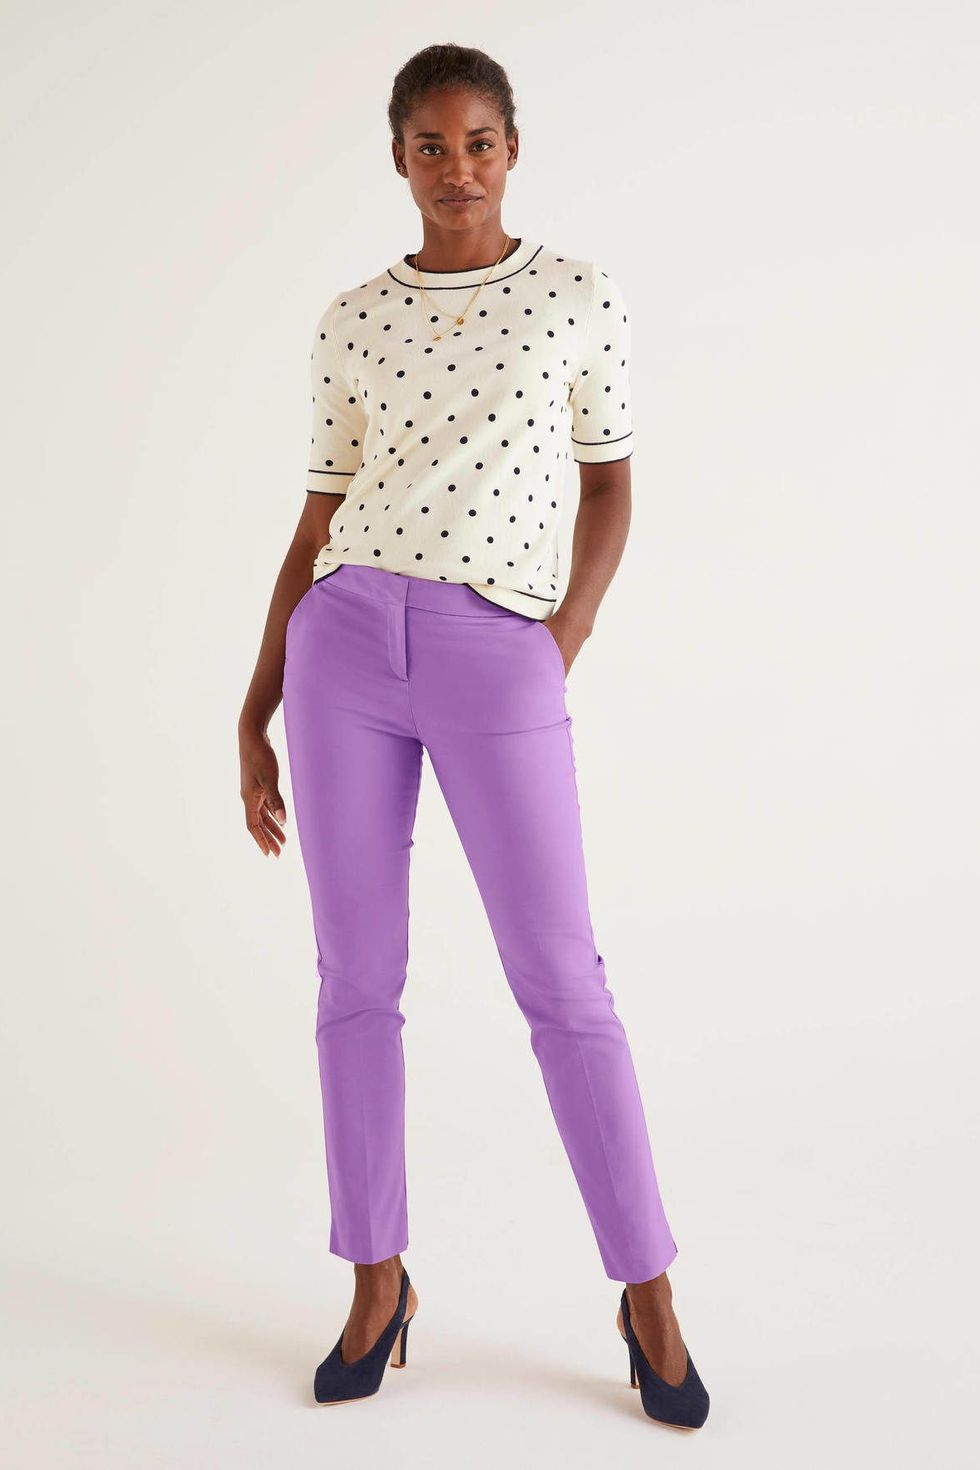 https://hips.hearstapps.com/vader-prod.s3.amazonaws.com/1579616119-boden-purple-trousers-1579616100.jpg?crop=0.8618004866180049xw:1xh;center,top&resize=980:*